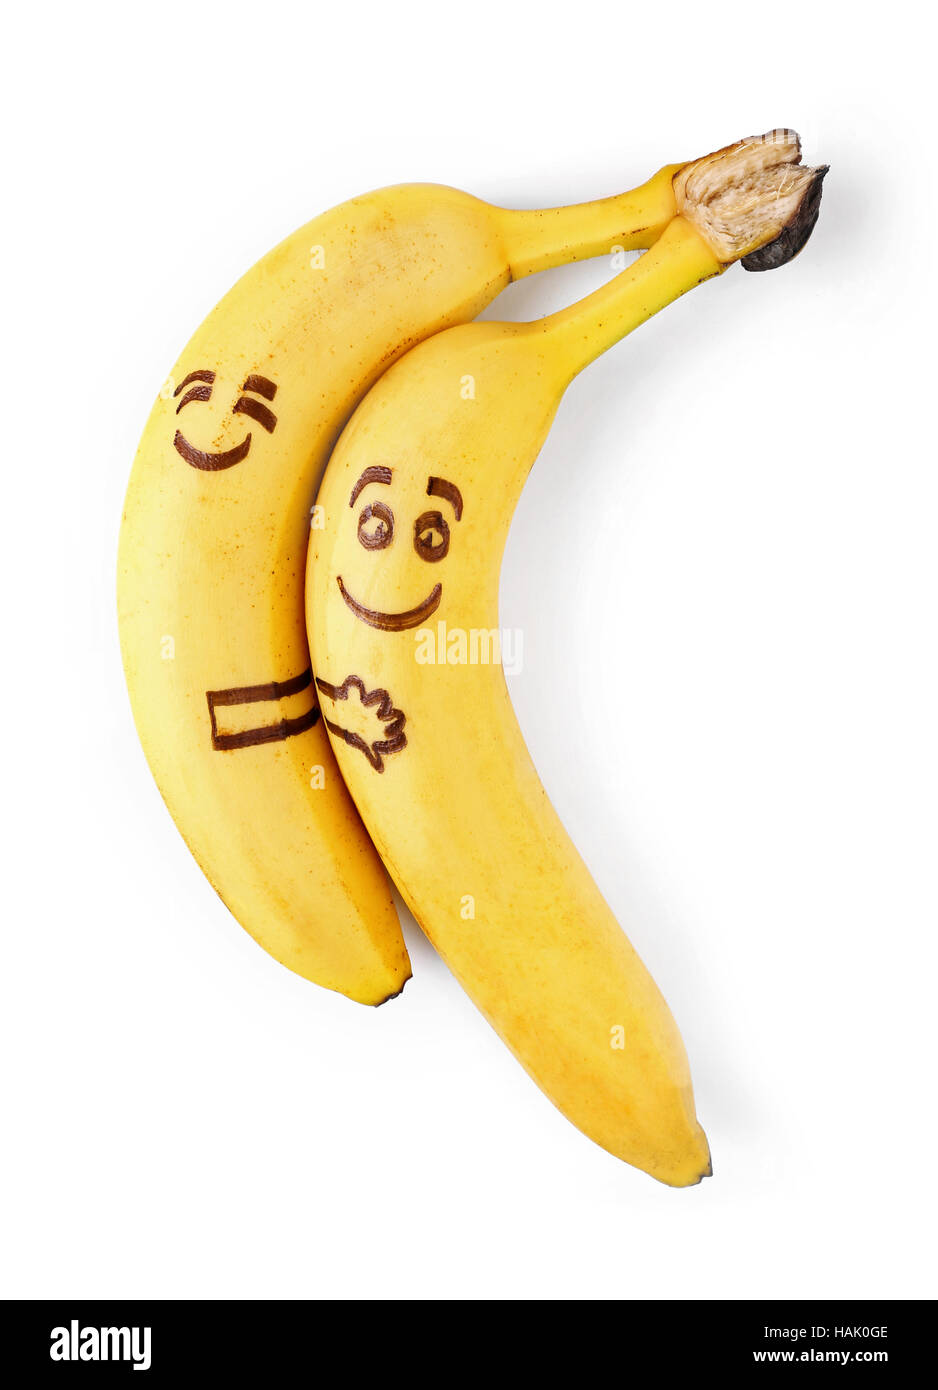 bananas with smiley faces, couple in love concept Stock Photo